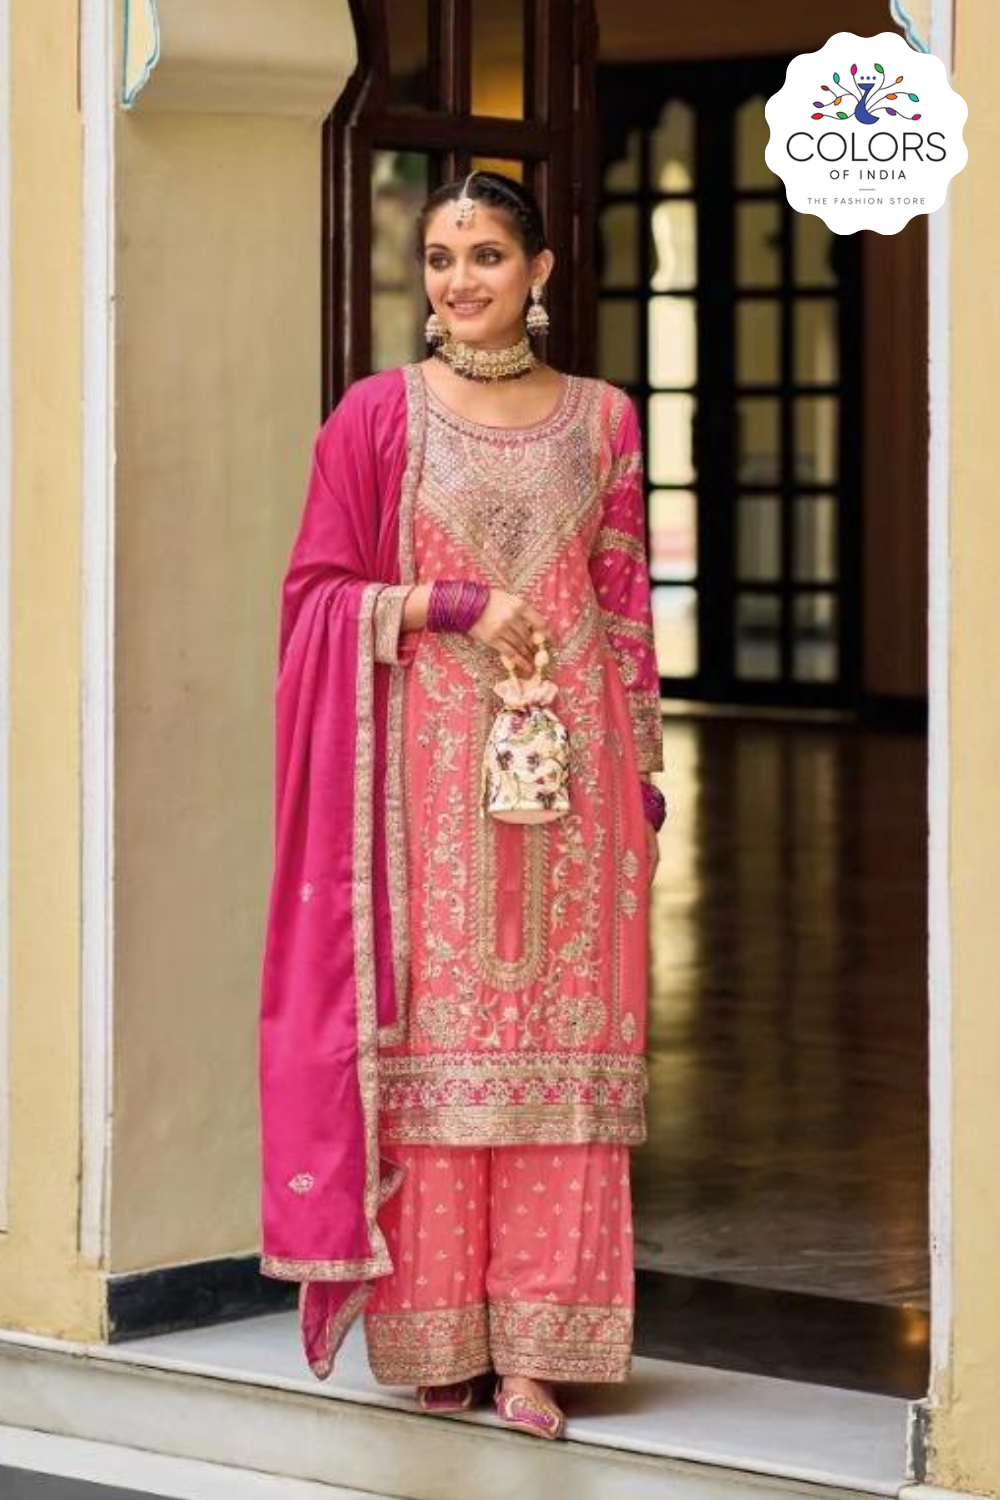 In The Style set in pink